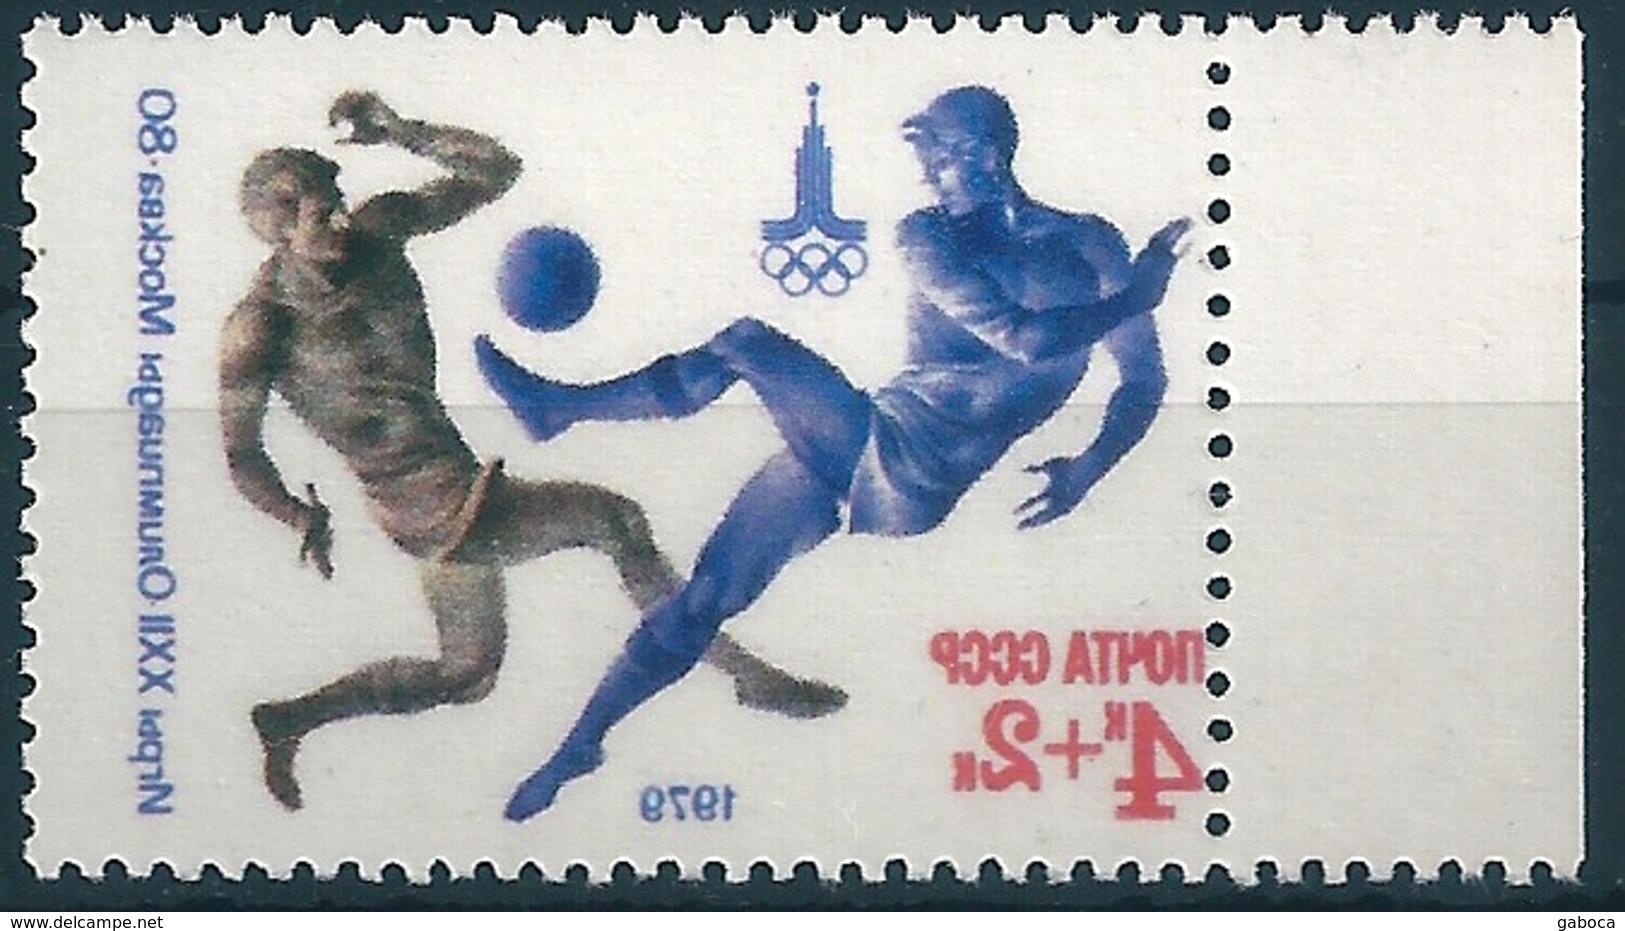 B4694 Russia USSR Olympics 1980 Moscow Sport Football Soccer ERROR (1 Stamp) - Sommer 1980: Moskau